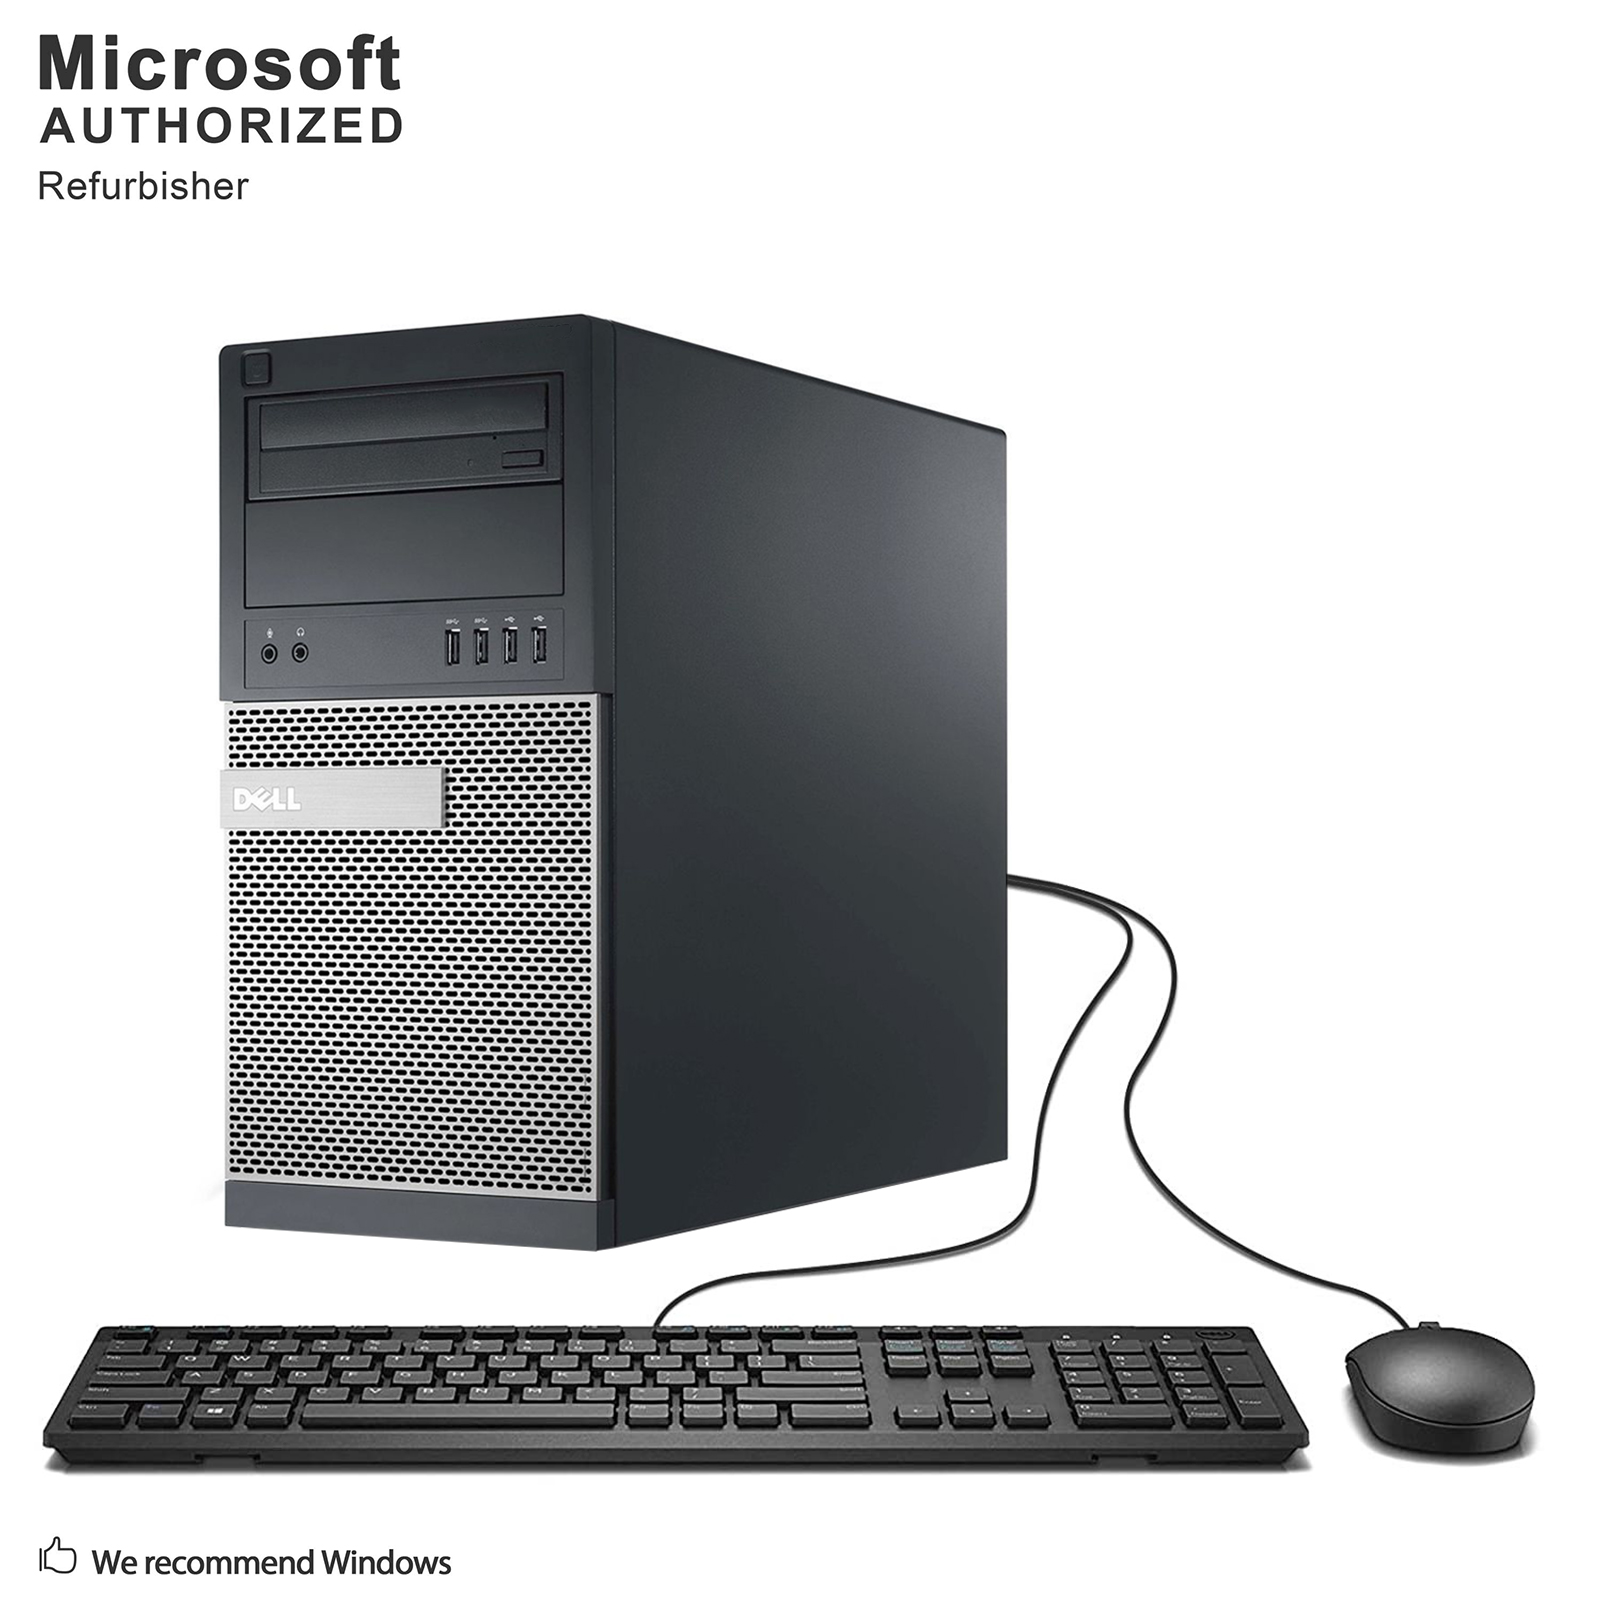 Used Grade A Dell OptiPlex 7010 Tower, Intel Quad Core I7-3770 up to 3.9G, 8G DDR3, 256G SSD, WiFi, BT 4.0, DVD, USB 3.0, VGA, DP, W10P64-Multi Languages Support (EN/ES/FR), 1 year warranty - image 1 of 7